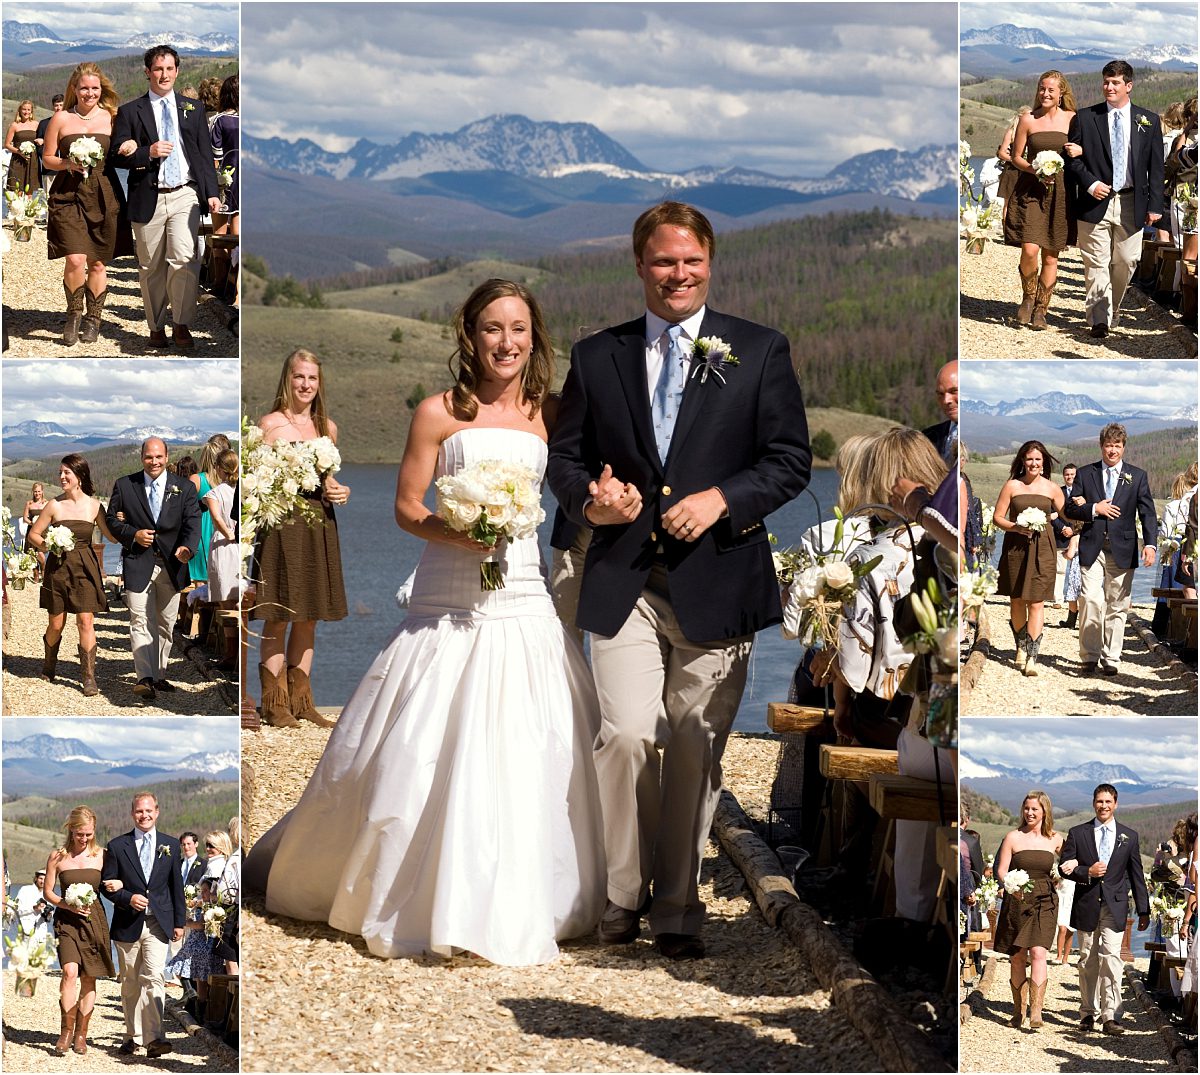 recessional,outdoor ceremony at Woodsie, C Lazy U Ranch Wedding, Granby, Colorado Wedding Photographer, Mountain Wedding Photography, bride and groom walking down the aisle after saying i do